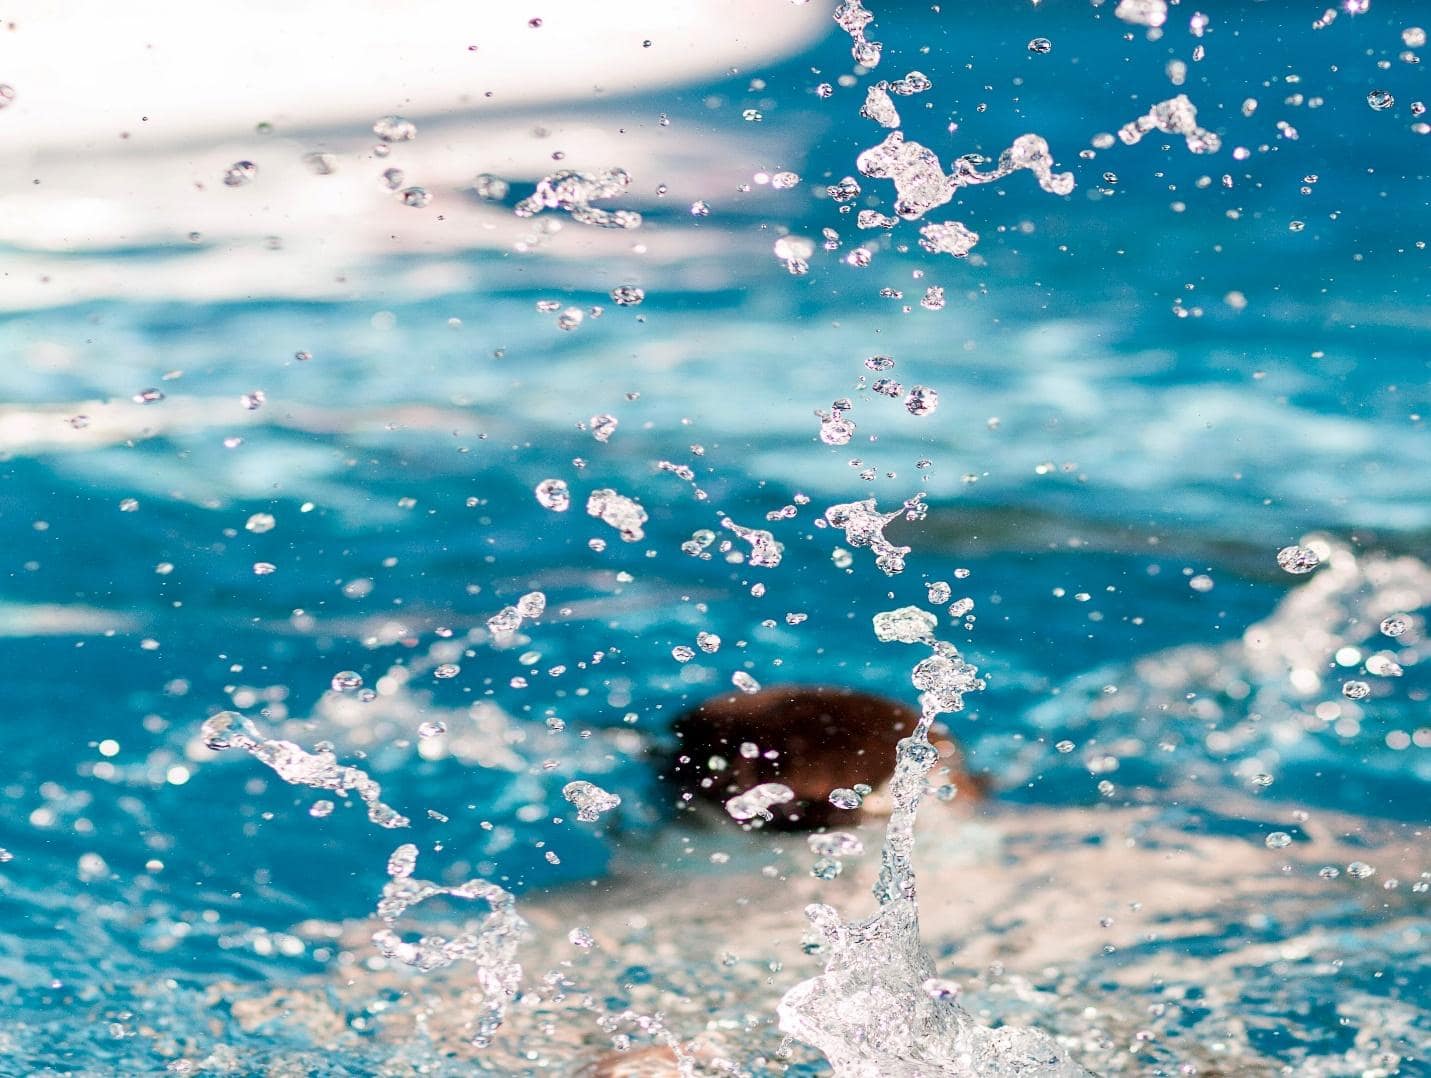 Who Can You Sue Following a Submersion Incident in a Swimming Pool?